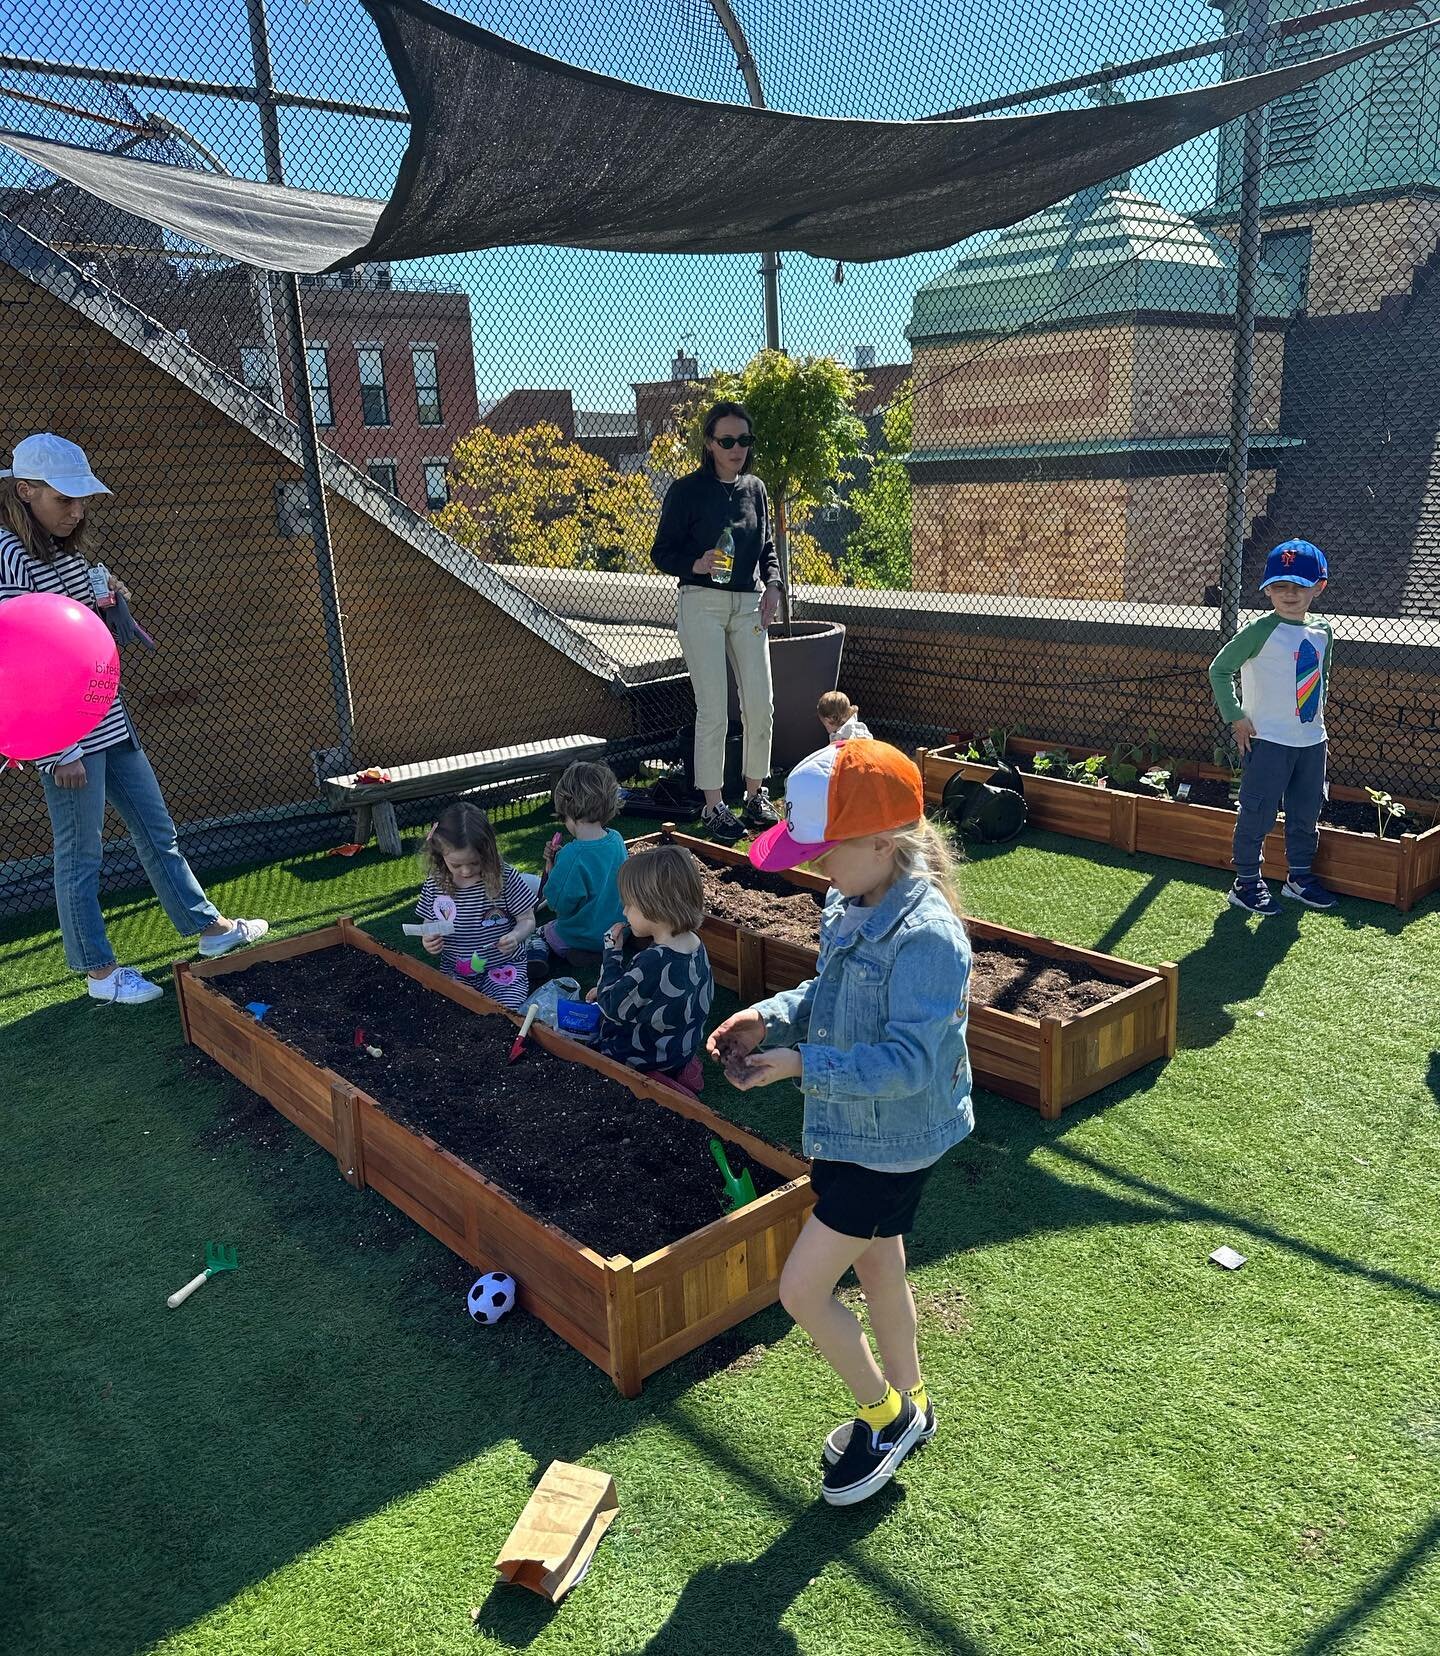 Preschool buddy planting event this past Saturday with Lower School and Mini Mastery Teachers was a HUGE success! Thank you to everyone who came out on this beautiful day to make the roof look so great!